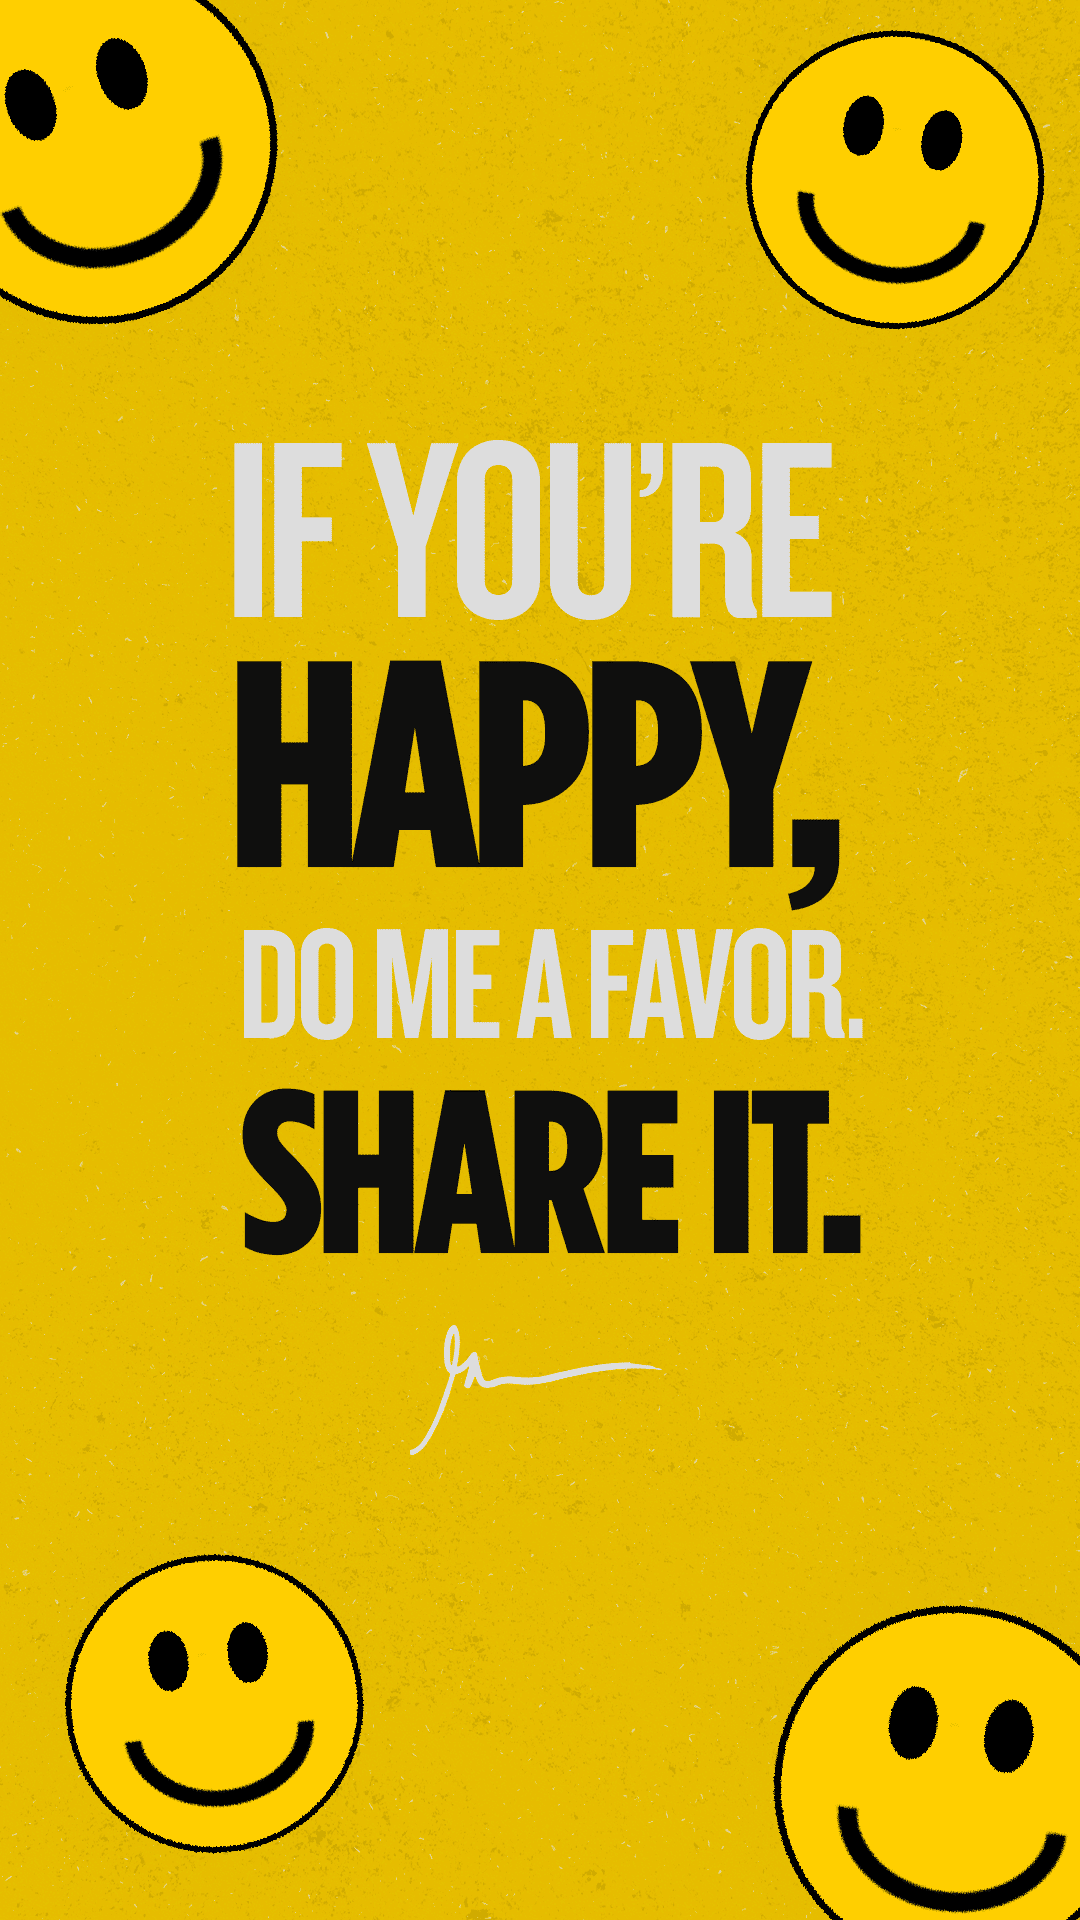 If you're happy, do me a favor, share it.